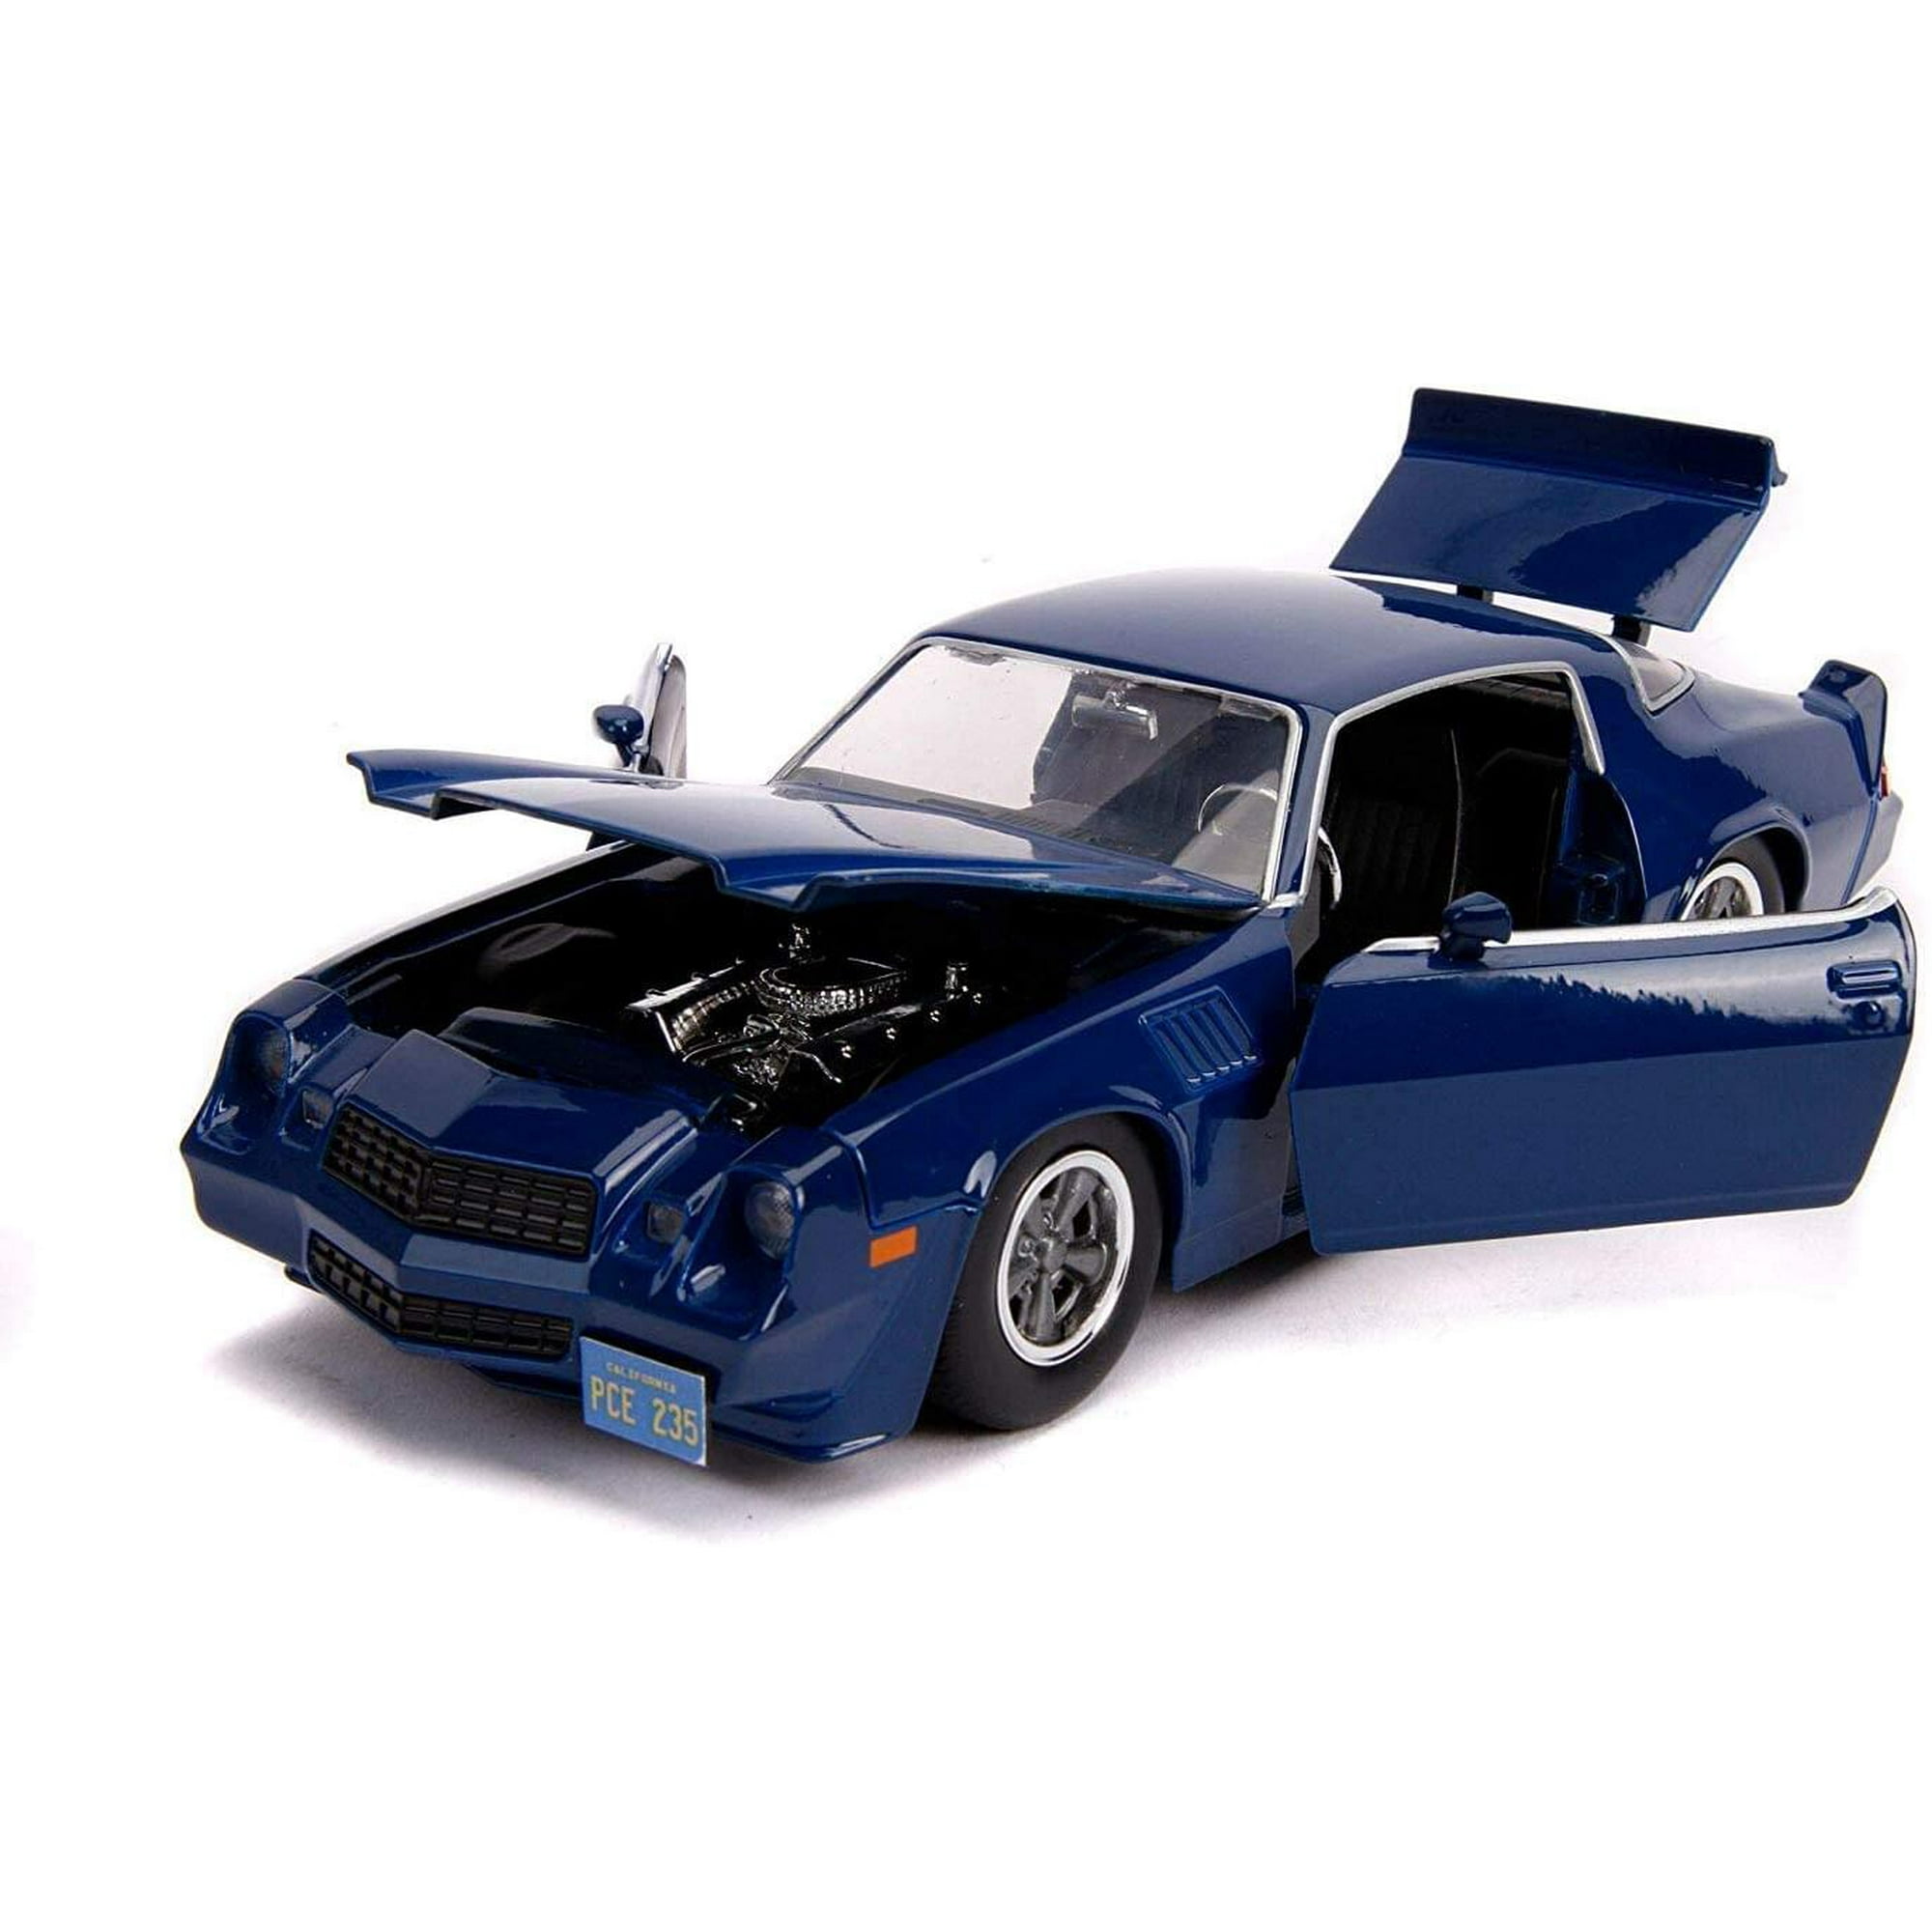 Jada 31110 Billys Chevrolet Camaro Z28 with Collectible Coin Stranger Things  TV Series 1 by 24 Diecast Model Car, Dark Blue | Walmart Canada